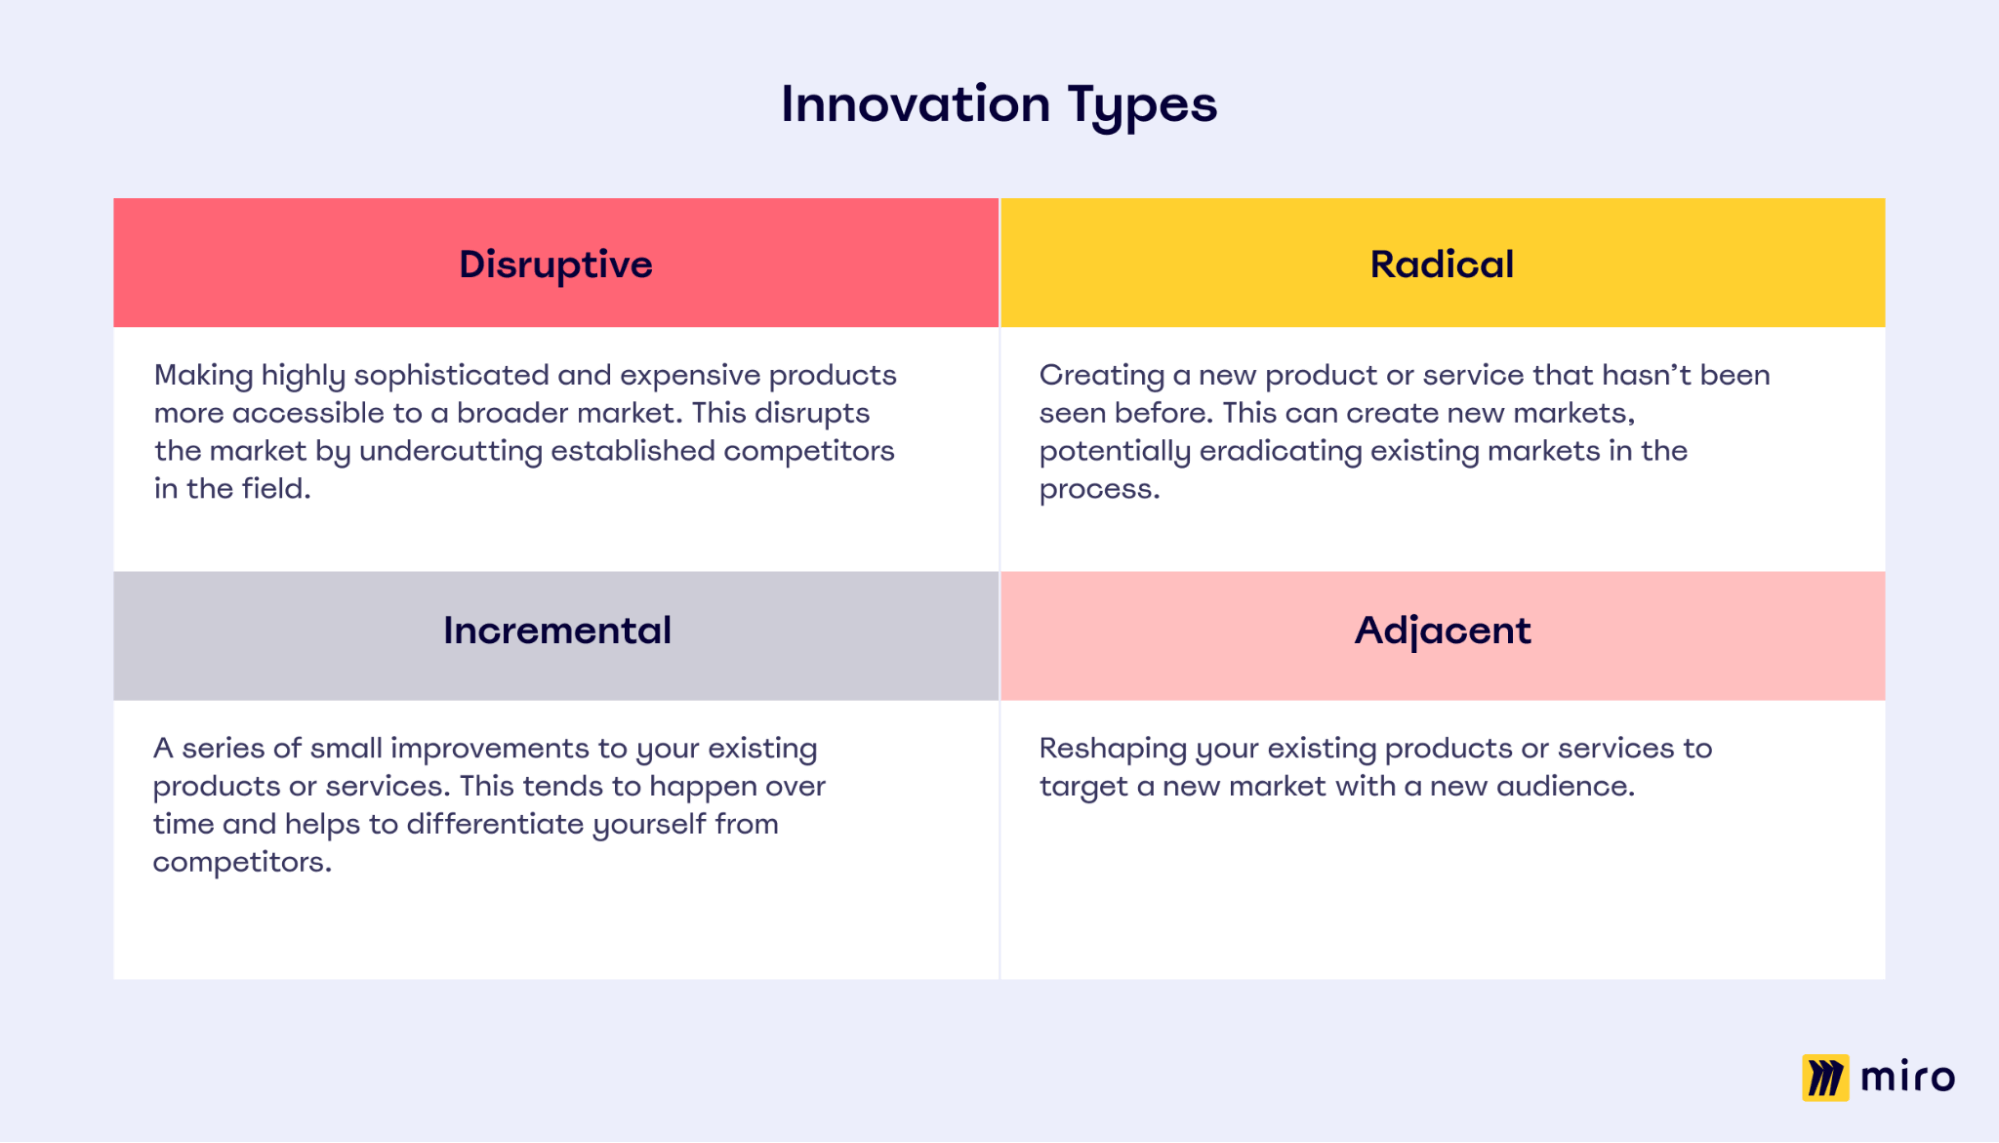 Table outlining the four key types of innovation